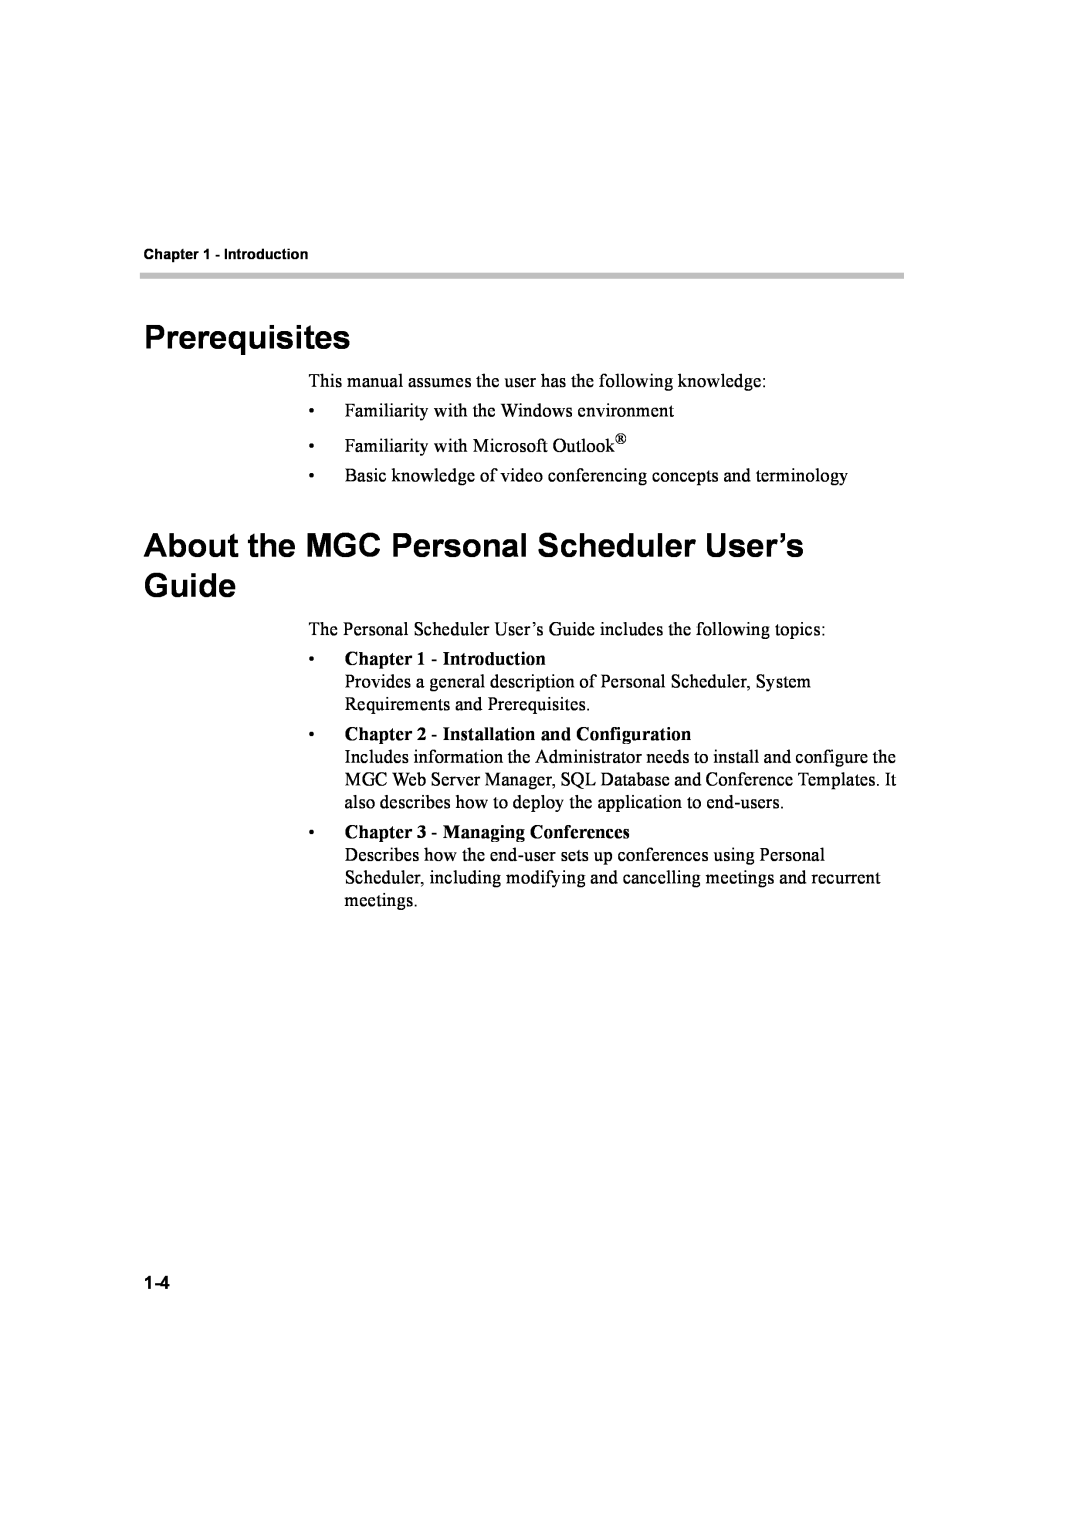 Polycom 8 Prerequisites, About the MGC Personal Scheduler User’s Guide, Introduction, Installation and Configuration 